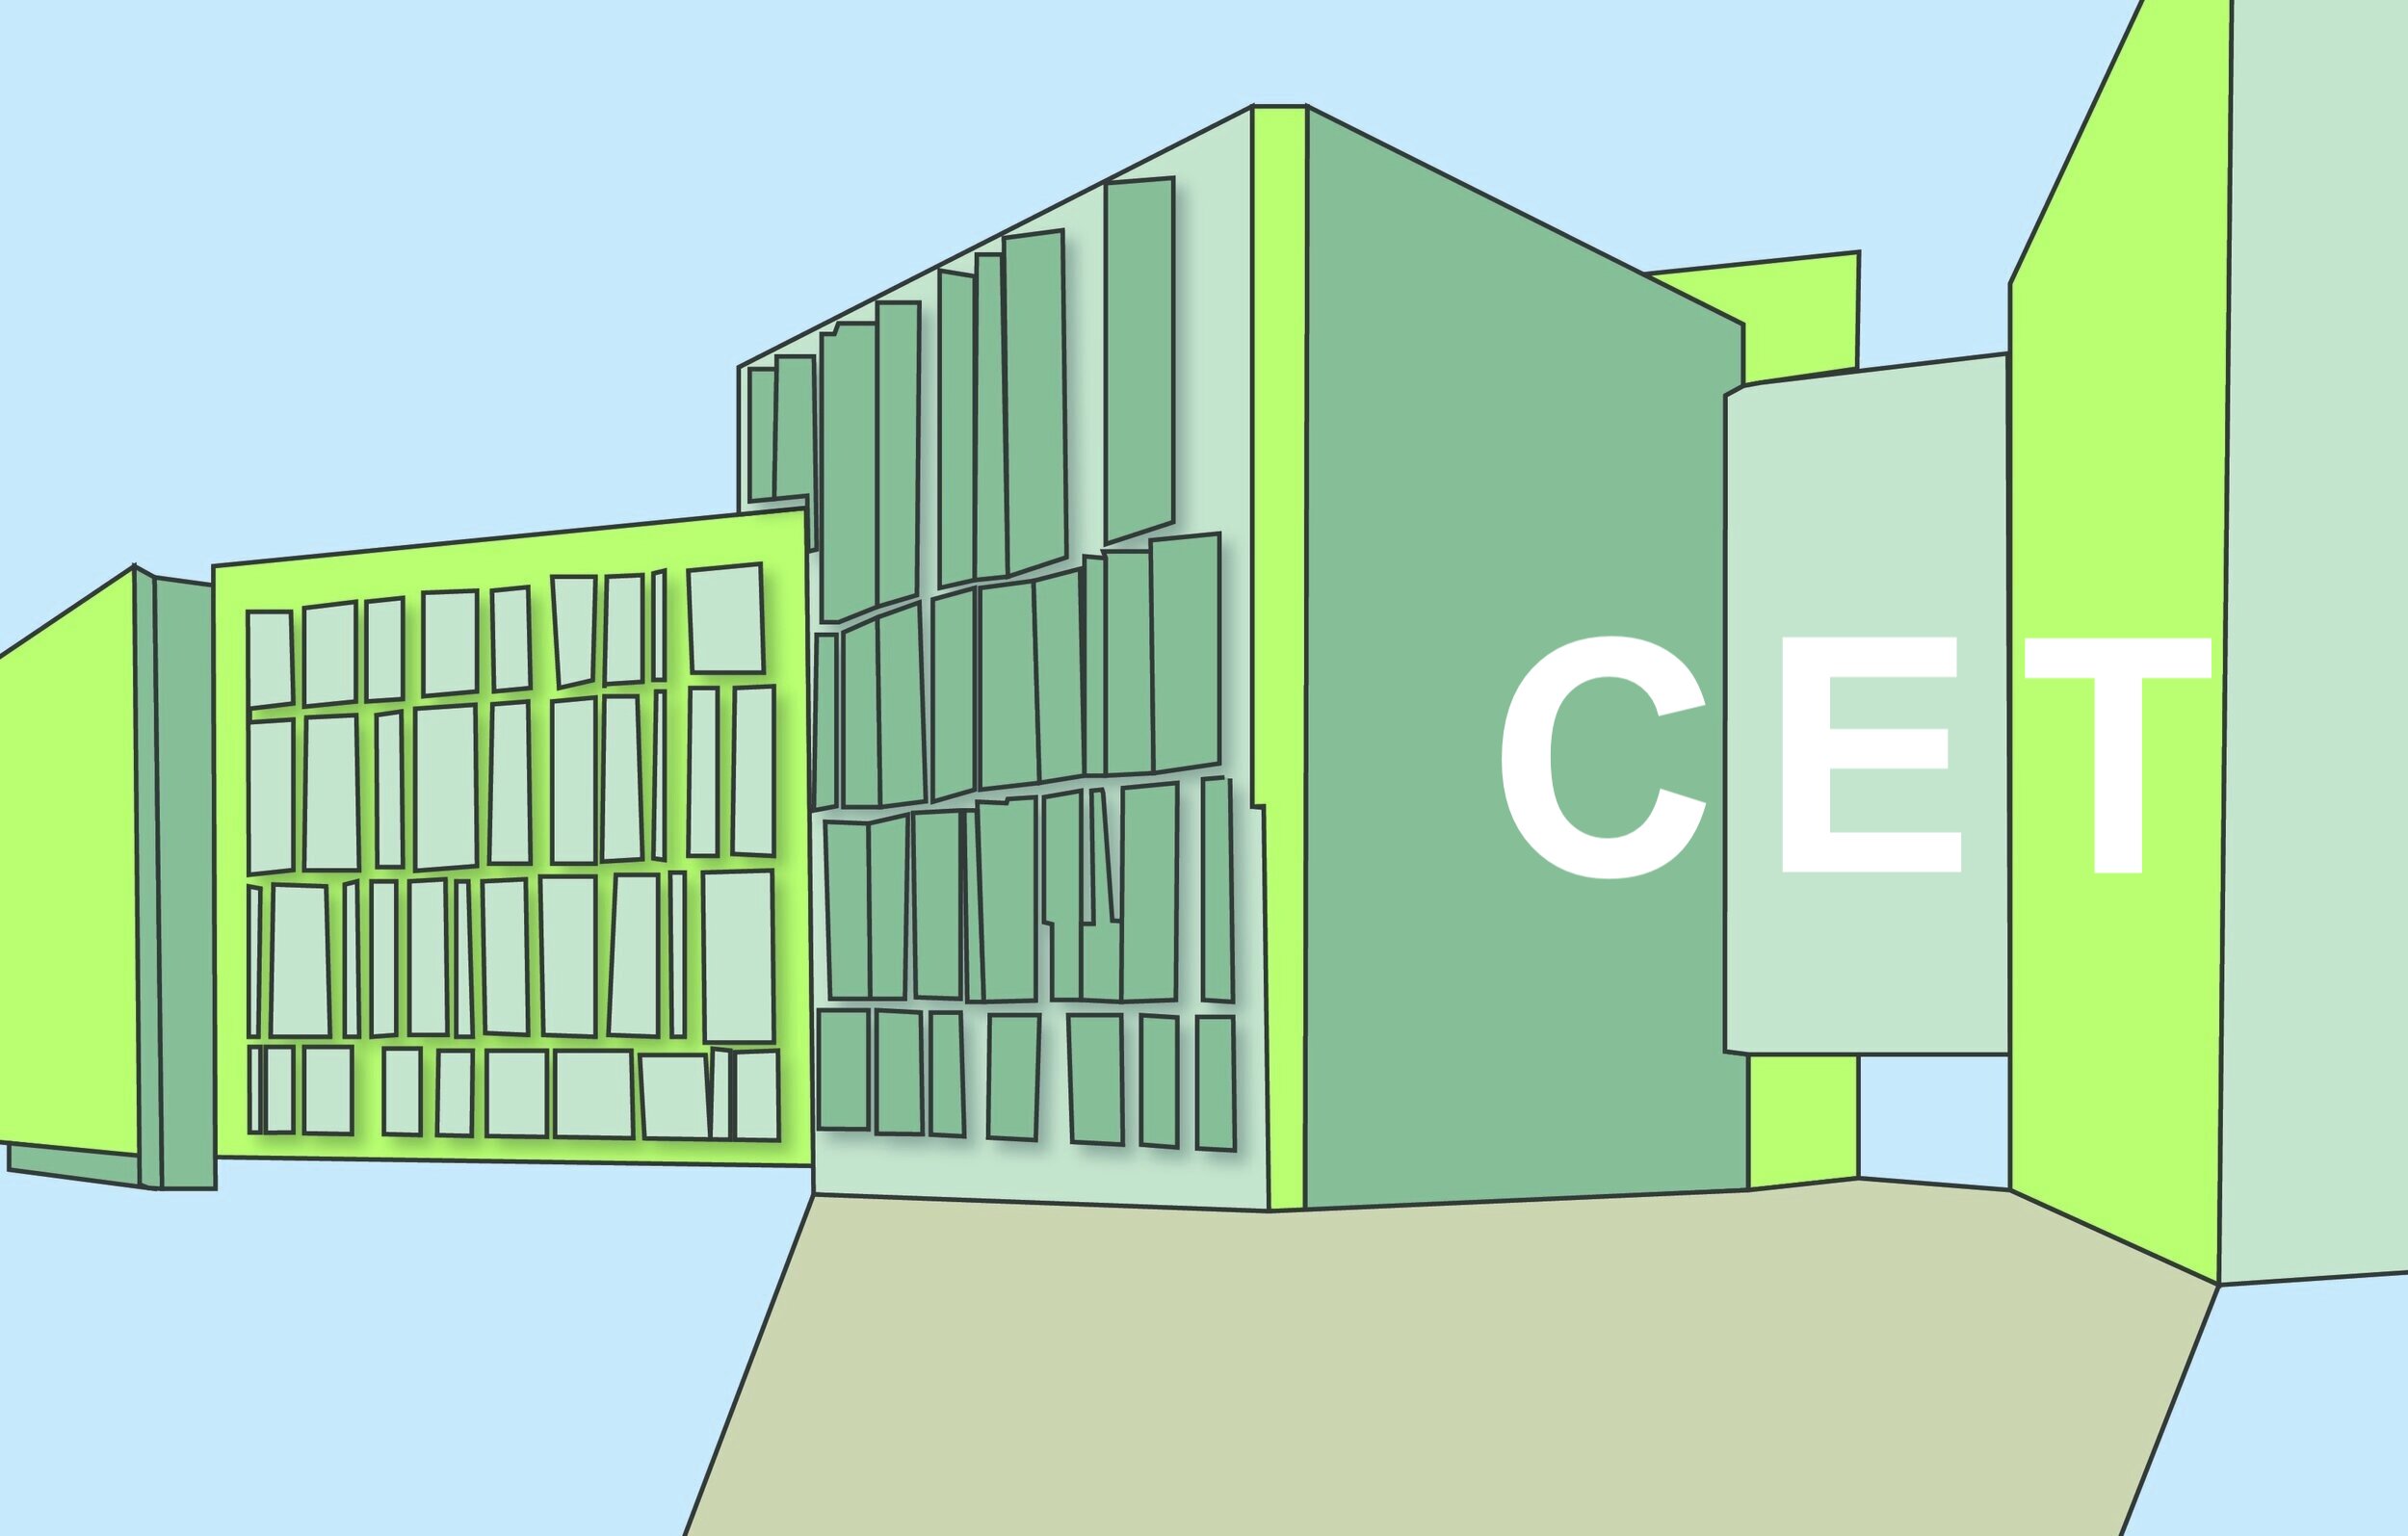 CET written on illustration of a building